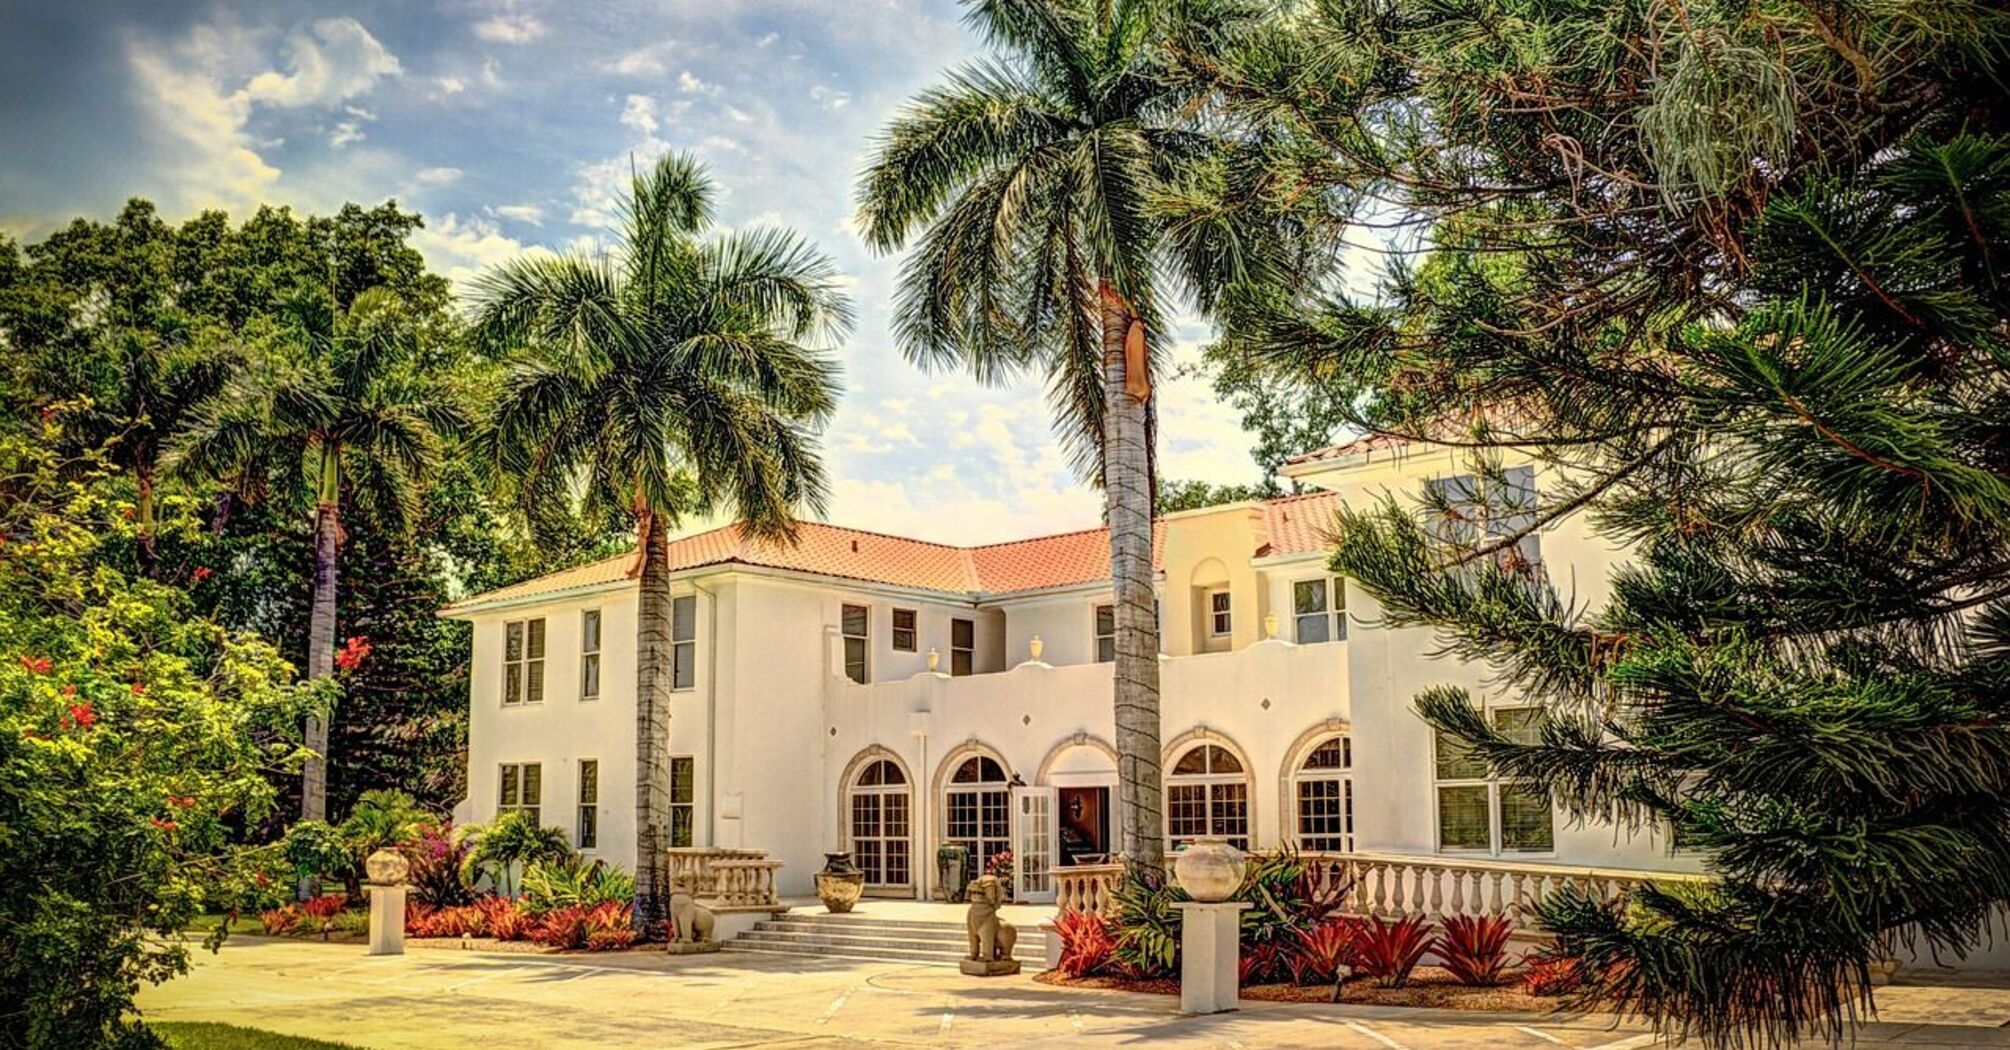 Florida's Cool Airbnbs: 12 locations for drive and fun in the sunshine state of the USA!